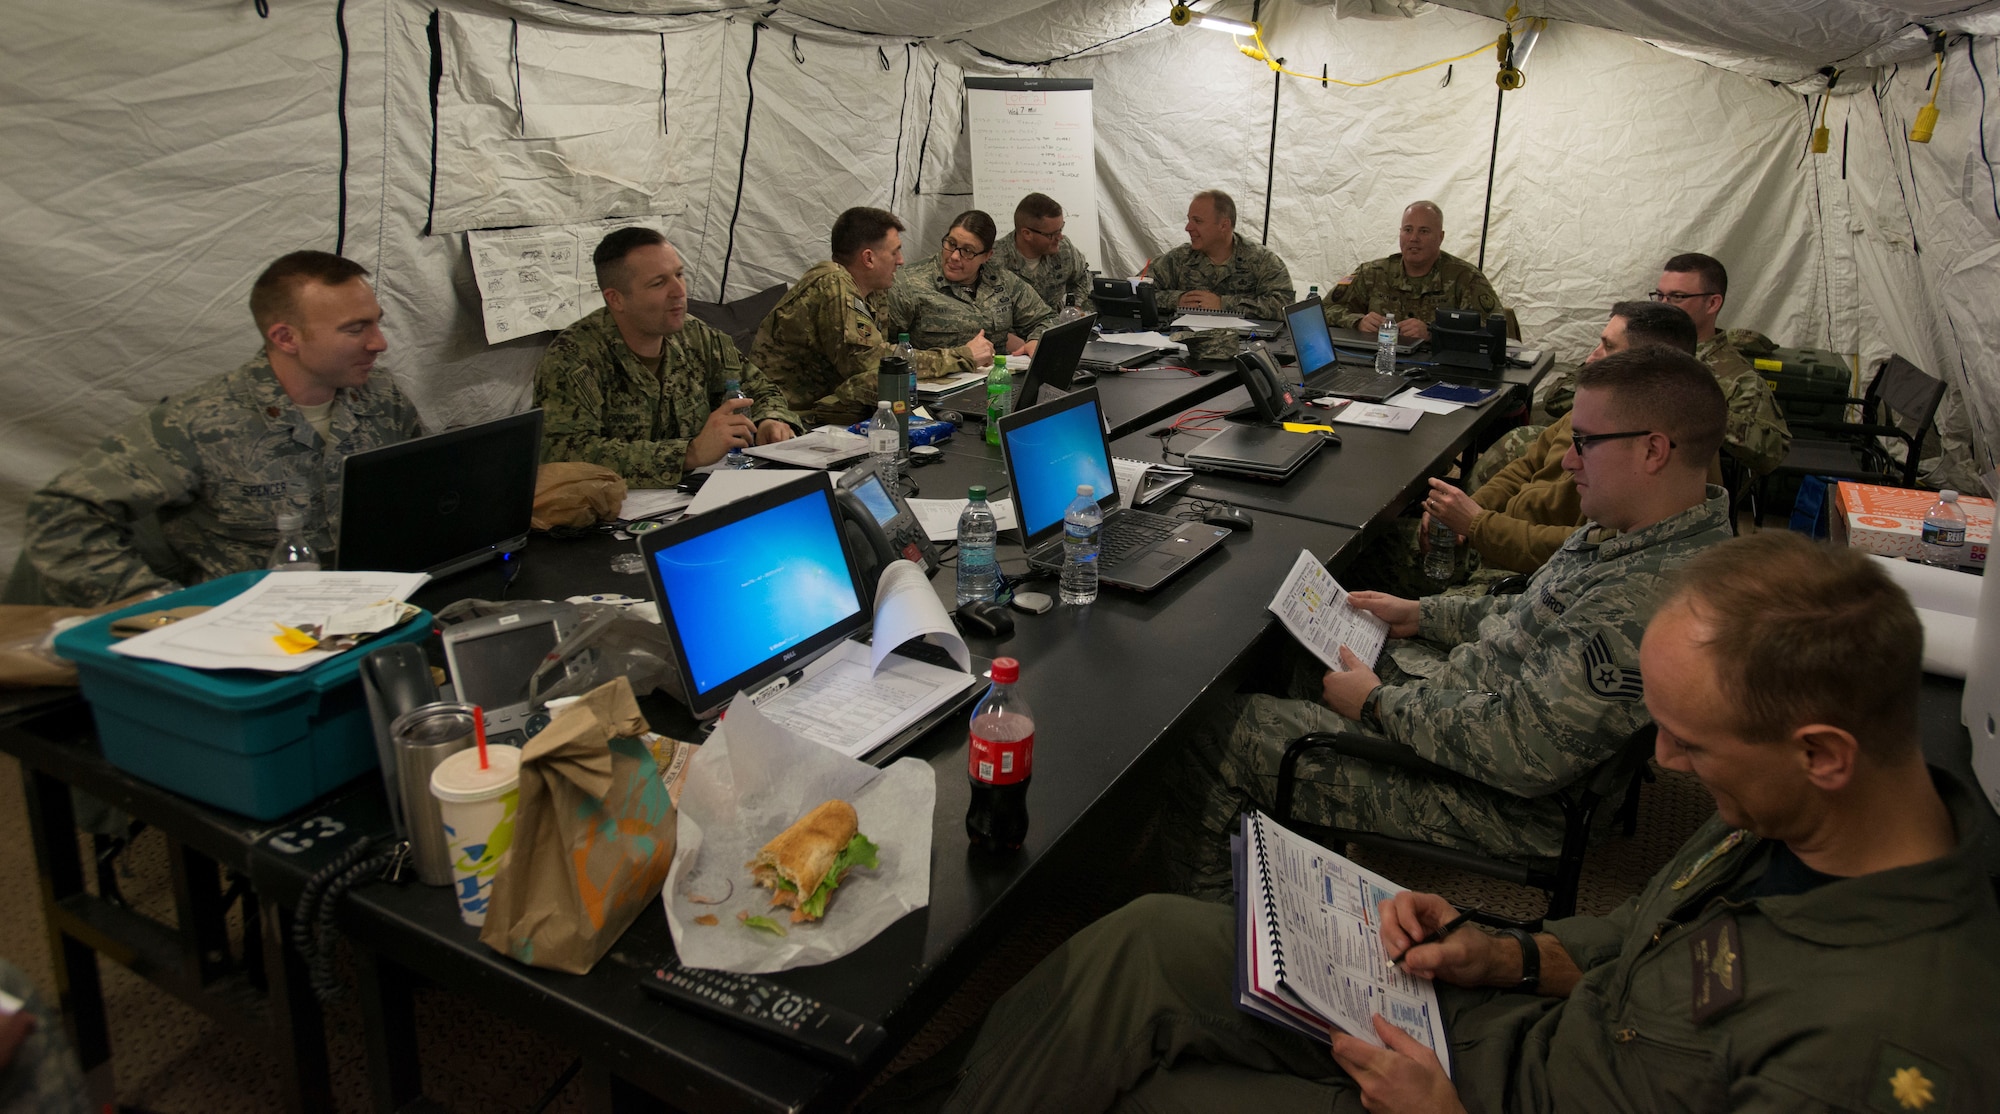 U.S. Airmen from the 9th Air Force, based at Shaw Air Force Base, S.C., and U.S. Soldiers, Sailors, and Airmen from the Joint Enabling Capabilities Command, Naval Station Norfolk, Va., discuss options to present a joint solution during the Joint Task Force-9 Staff Exercise 18-3 at Shaw AFB, March 7, 2018.